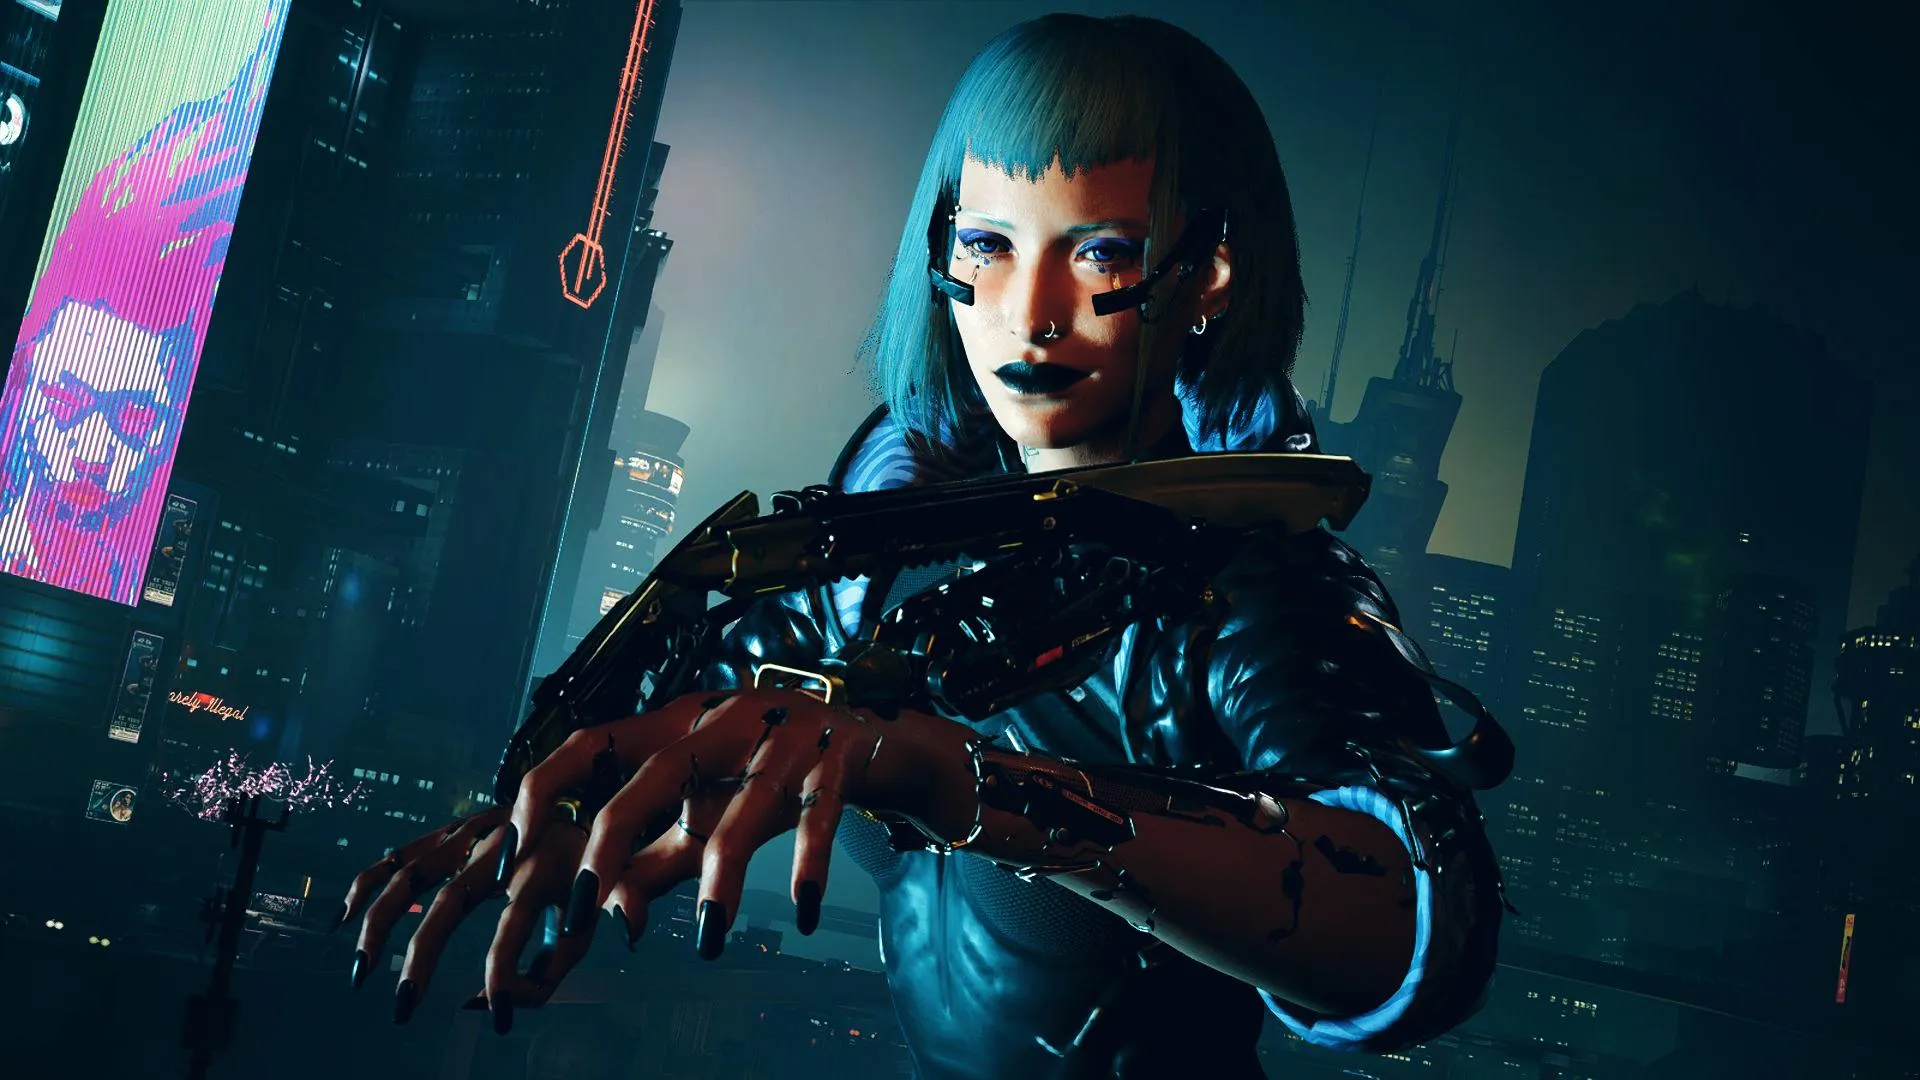 Cyberpunk 2077 Gets GTA 5-Inspired Fast Travel Animations In New Mod